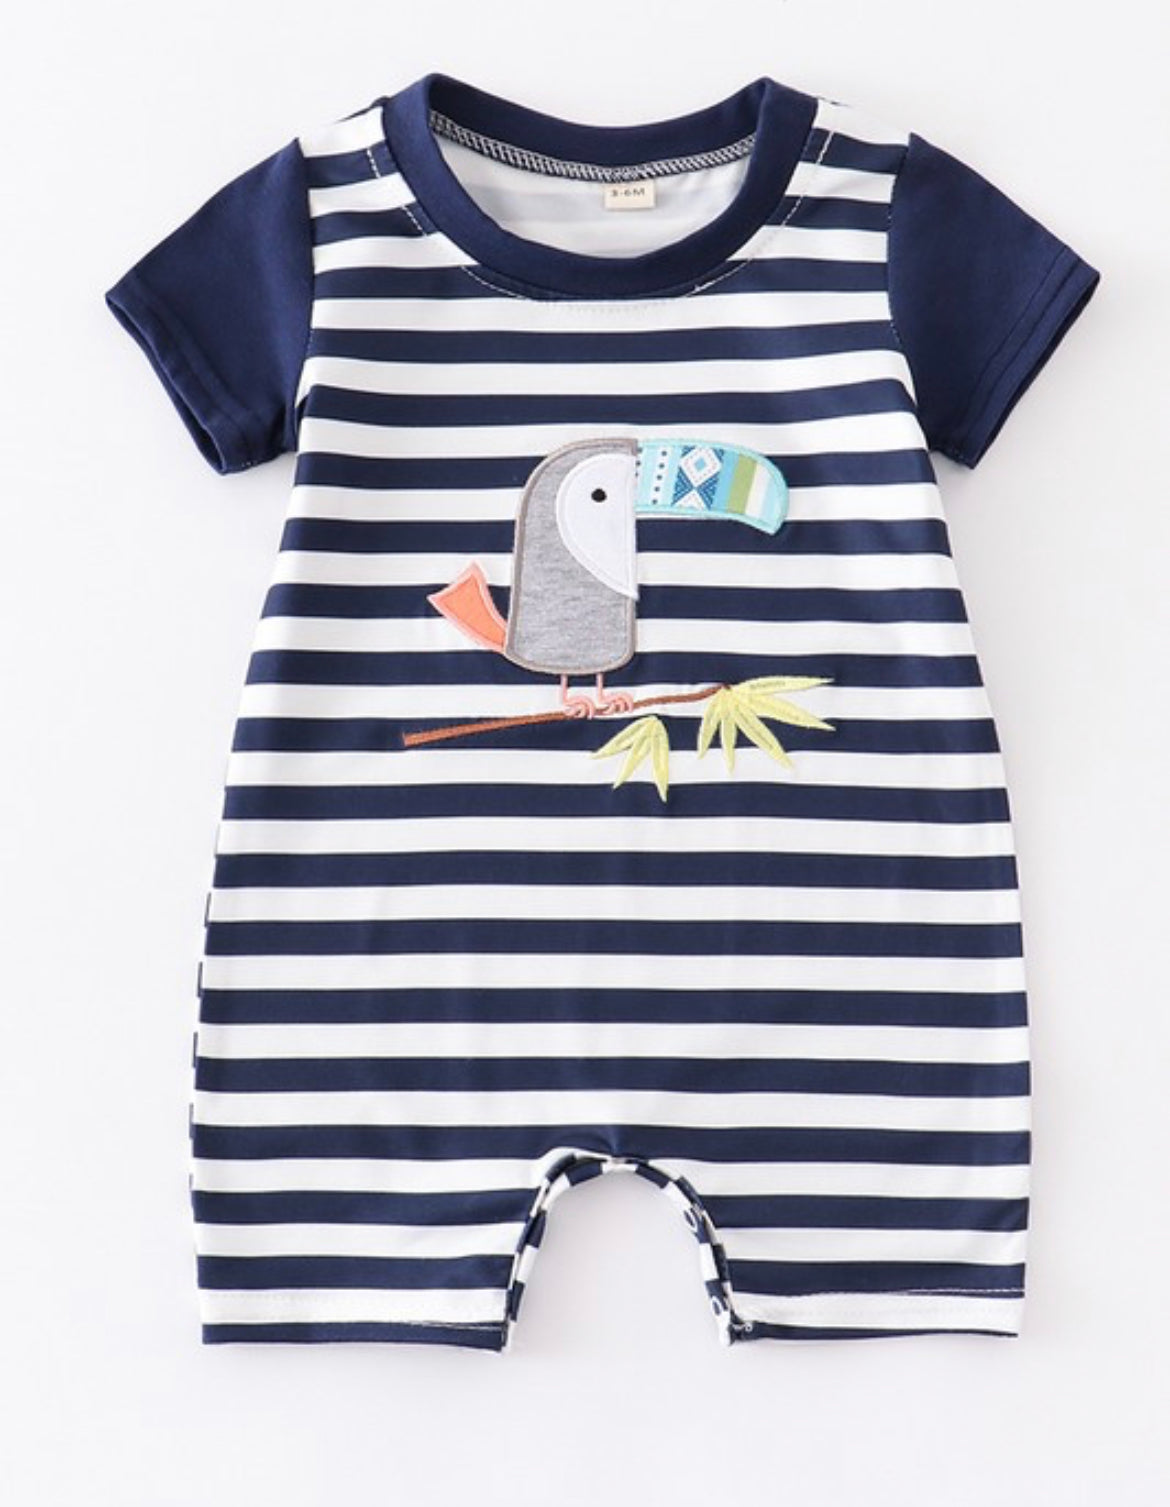 Navy Stripe Parrot Embroidery Romper*